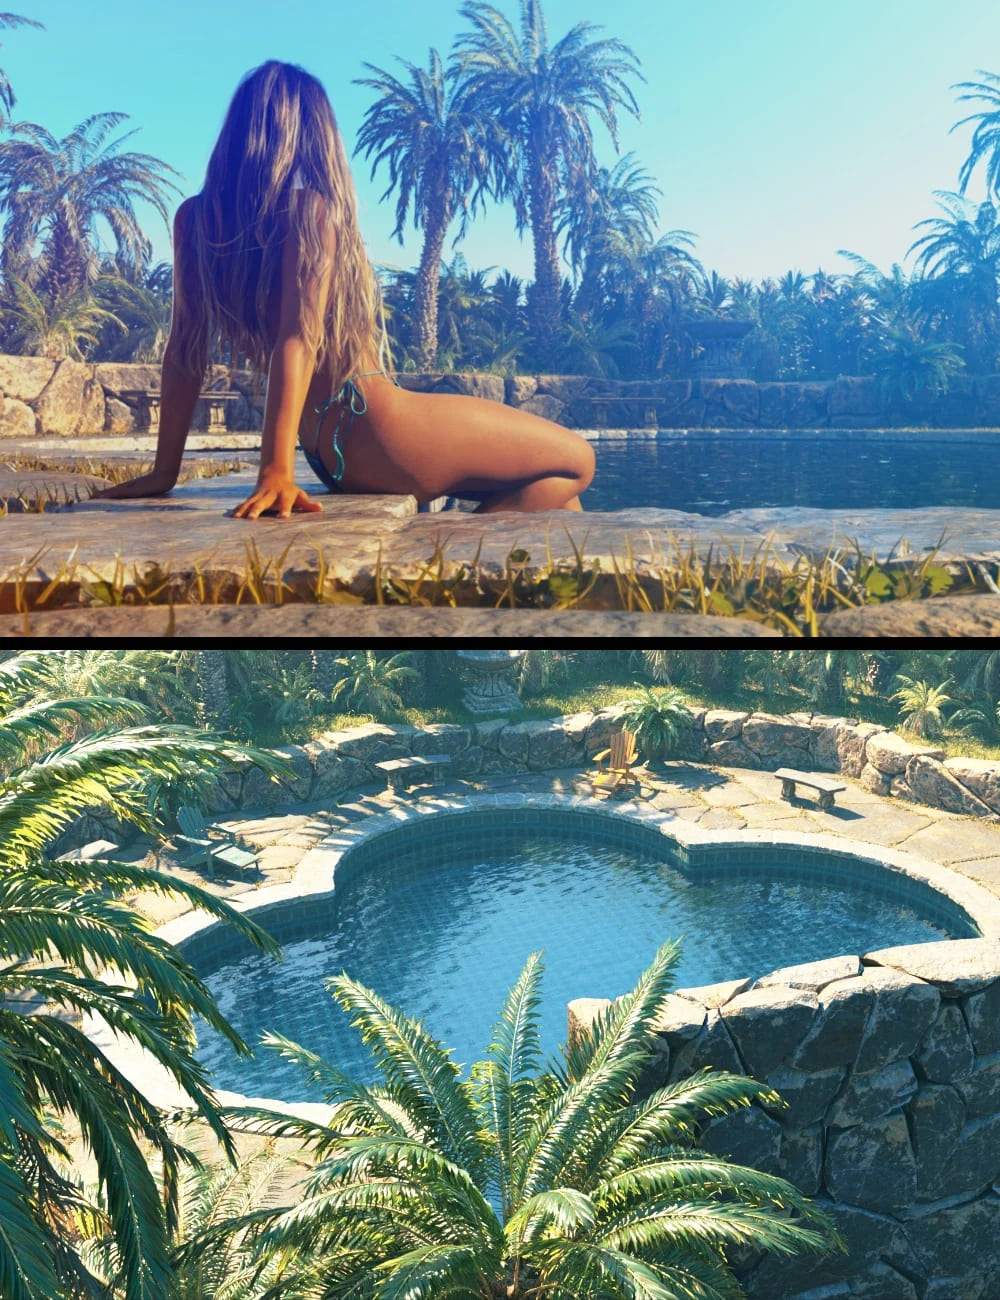 Natural Stone Poolside and Scenes_DAZ3DDL